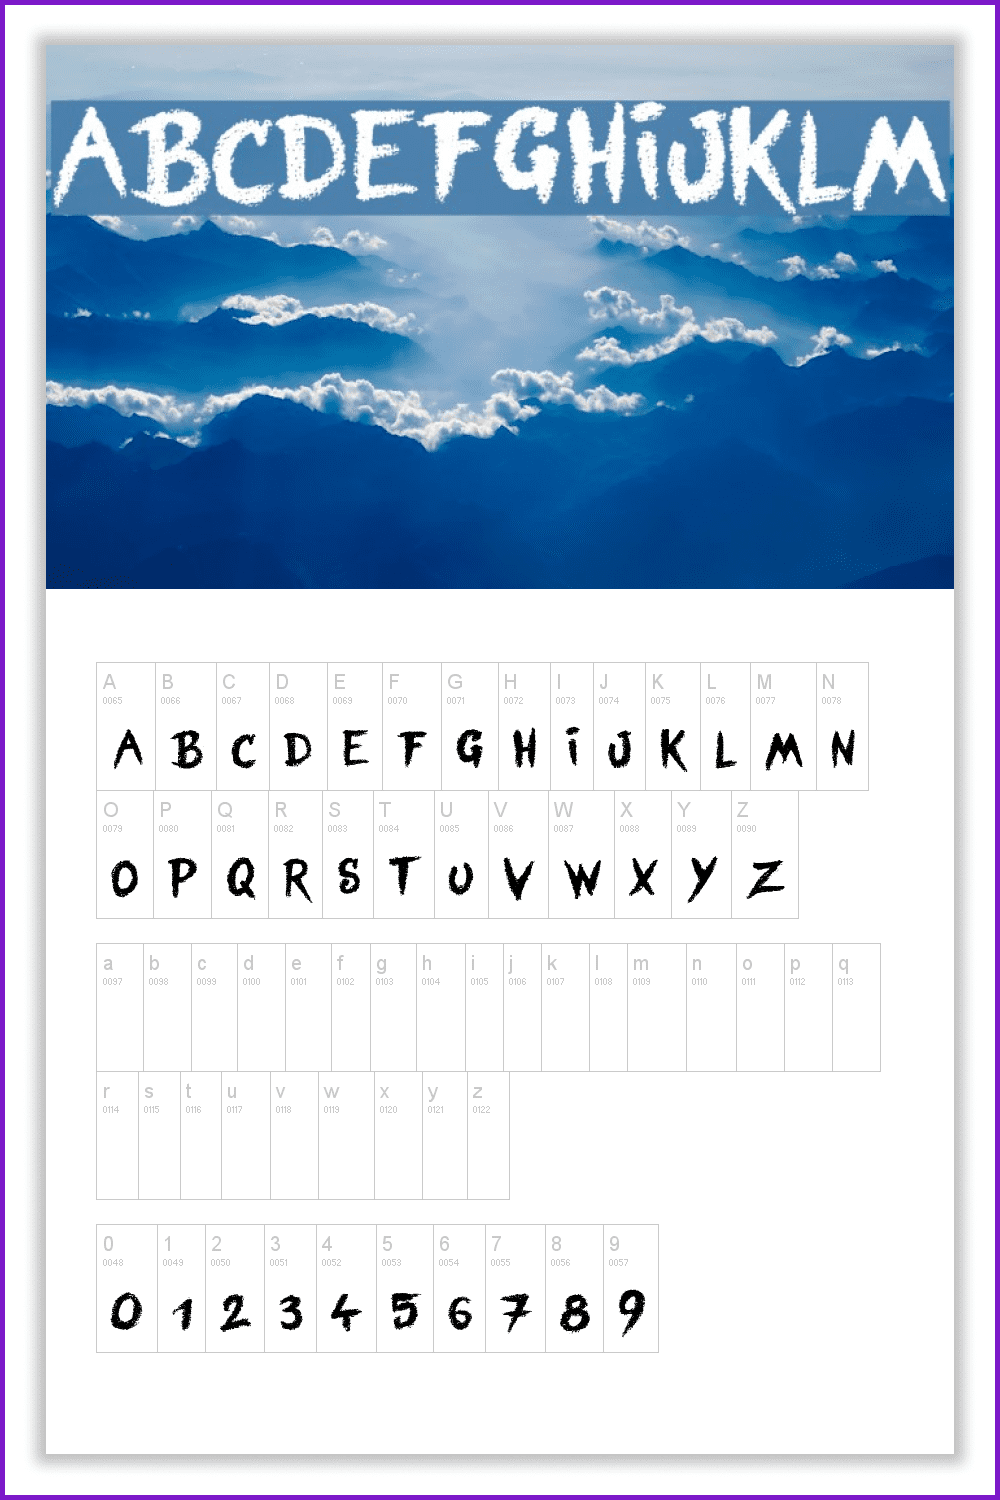 Alphabet in font on a white background and an example of use on the background of a photograph of mountains and clouds.